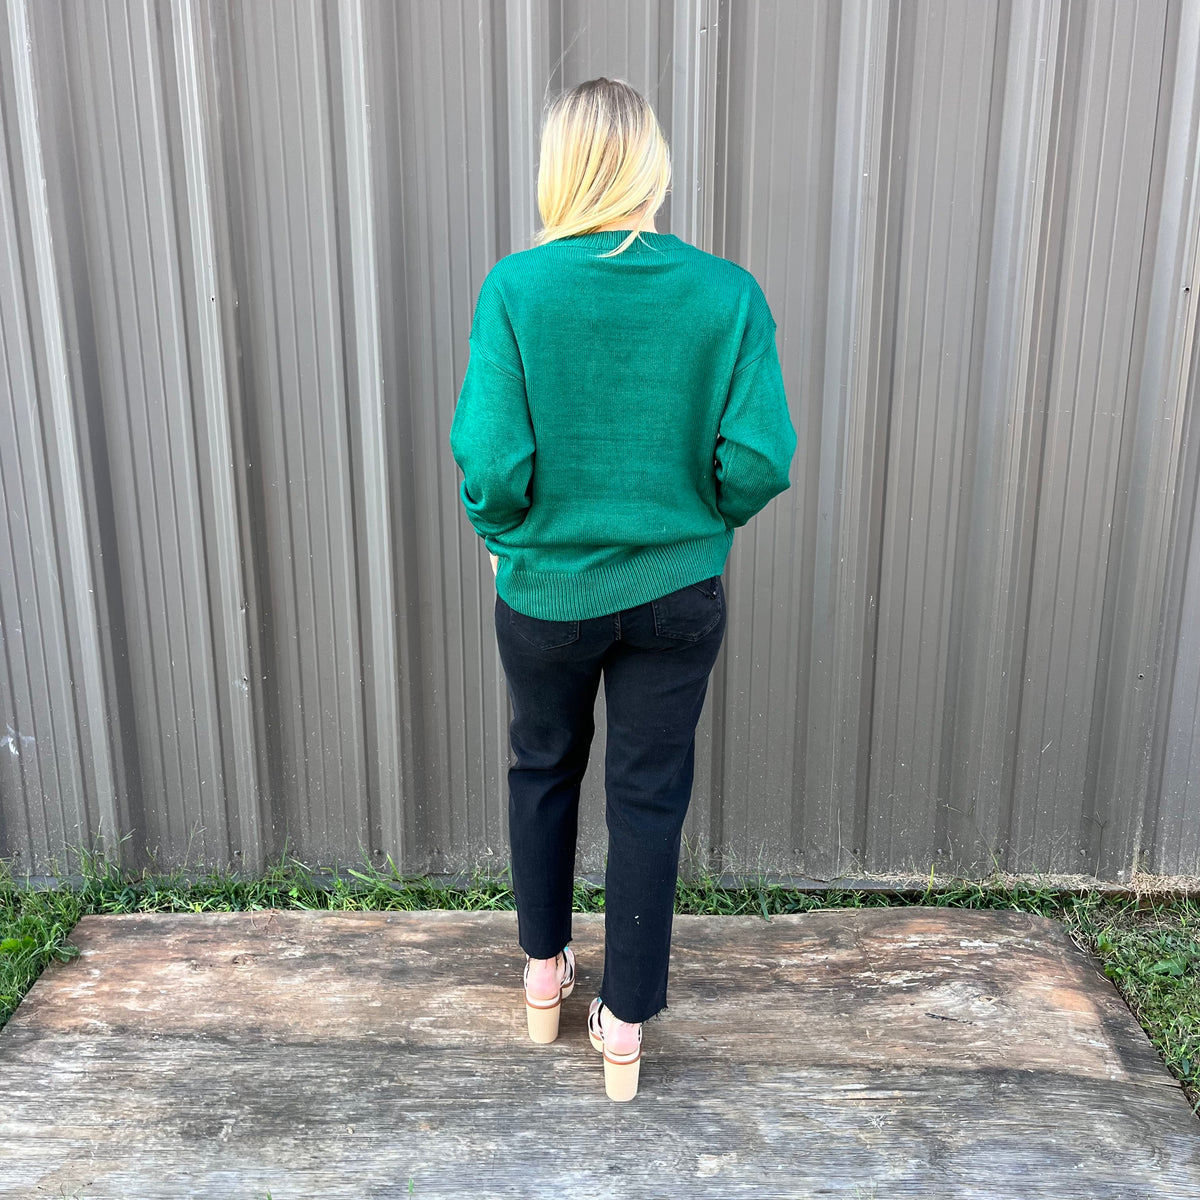 GREEN GOLD SEQUIN BOW SWEATER